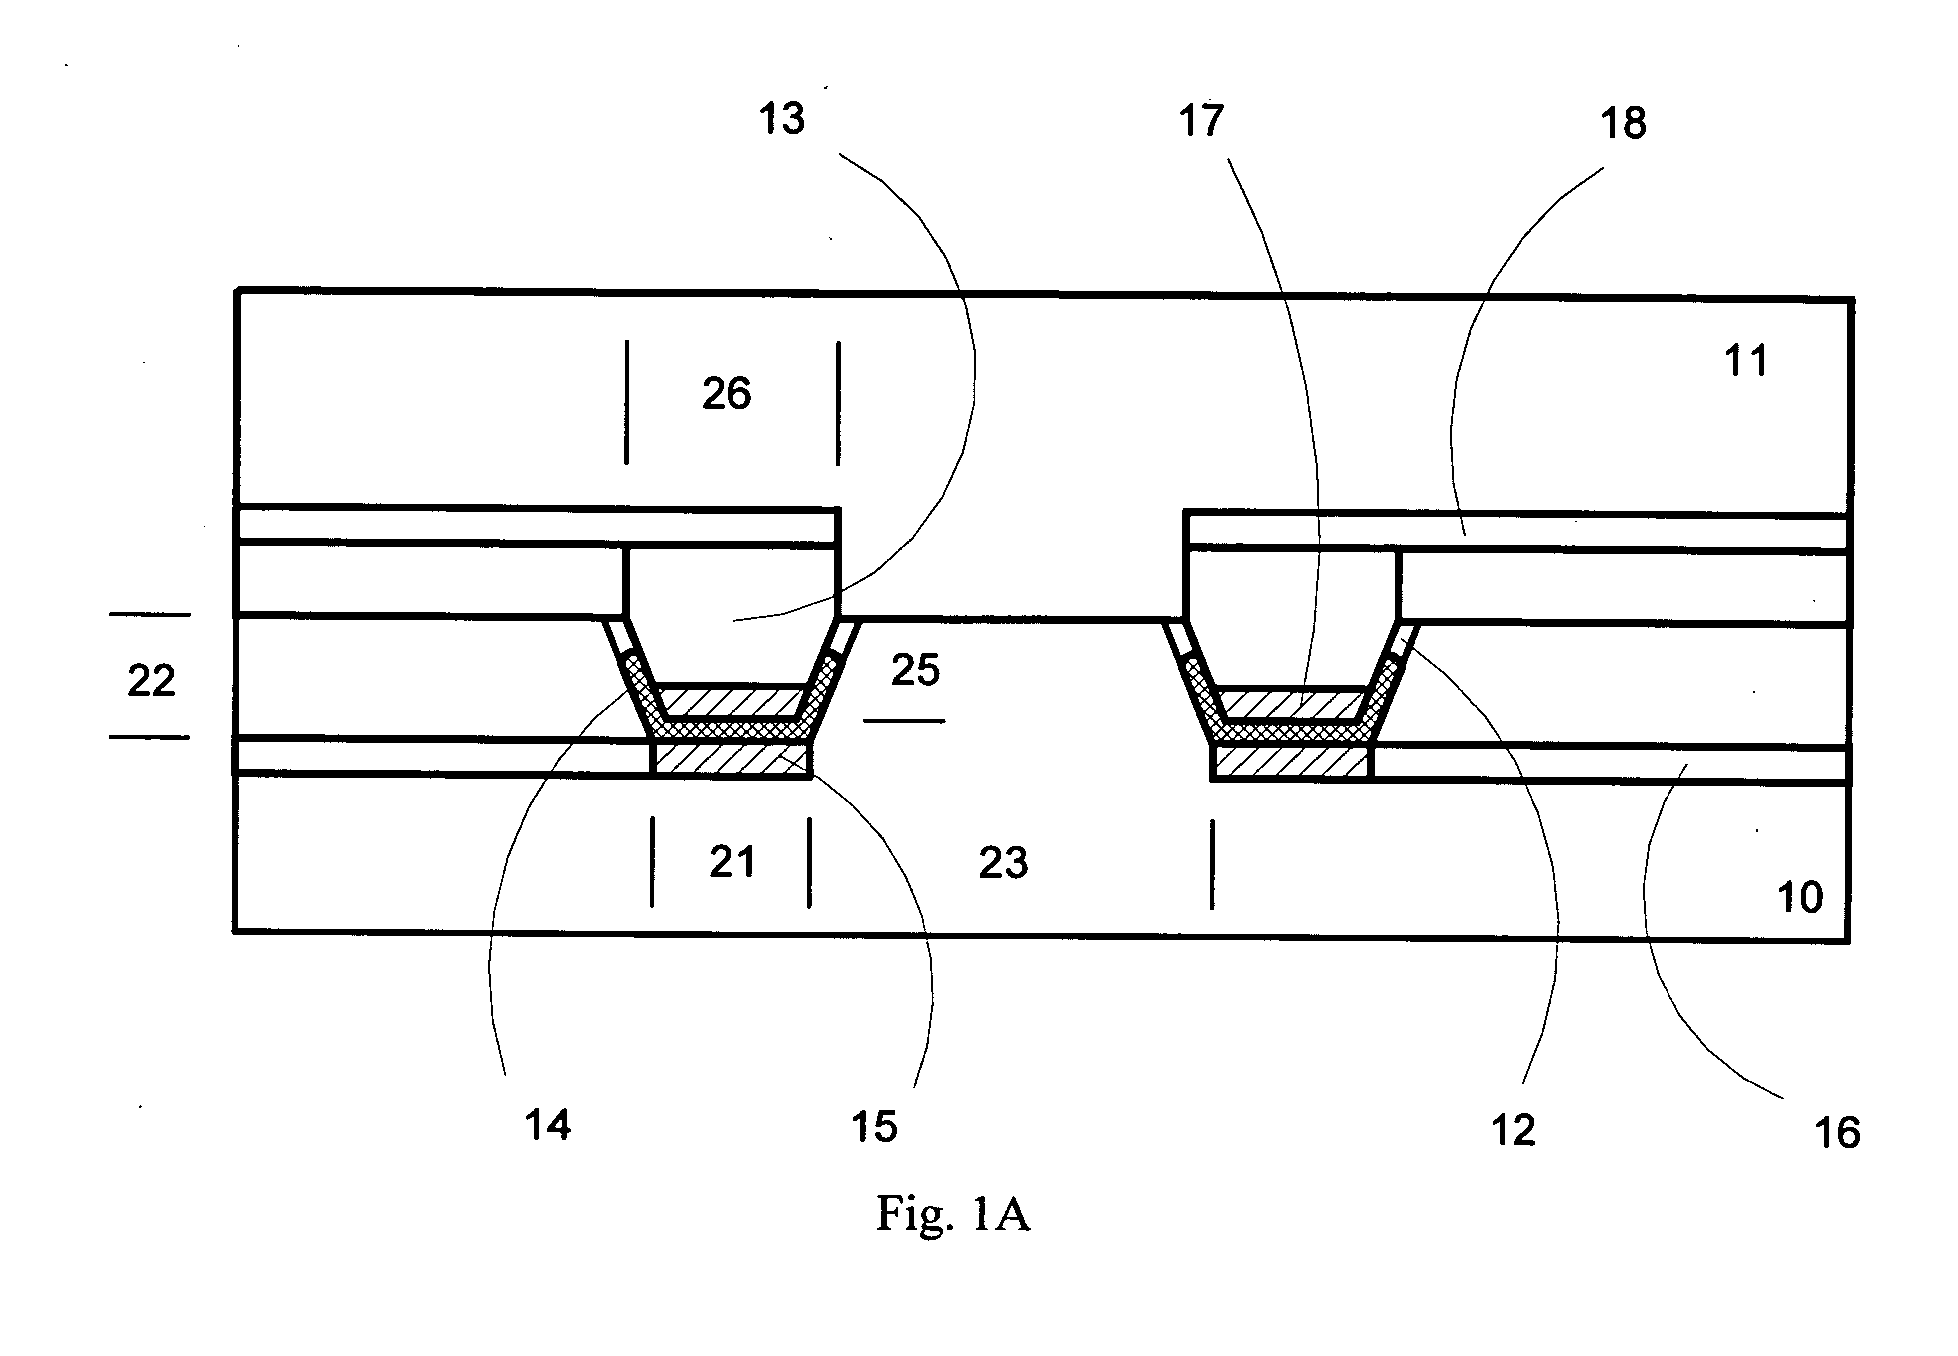 Method of packaging and interconnection of integrated circuits